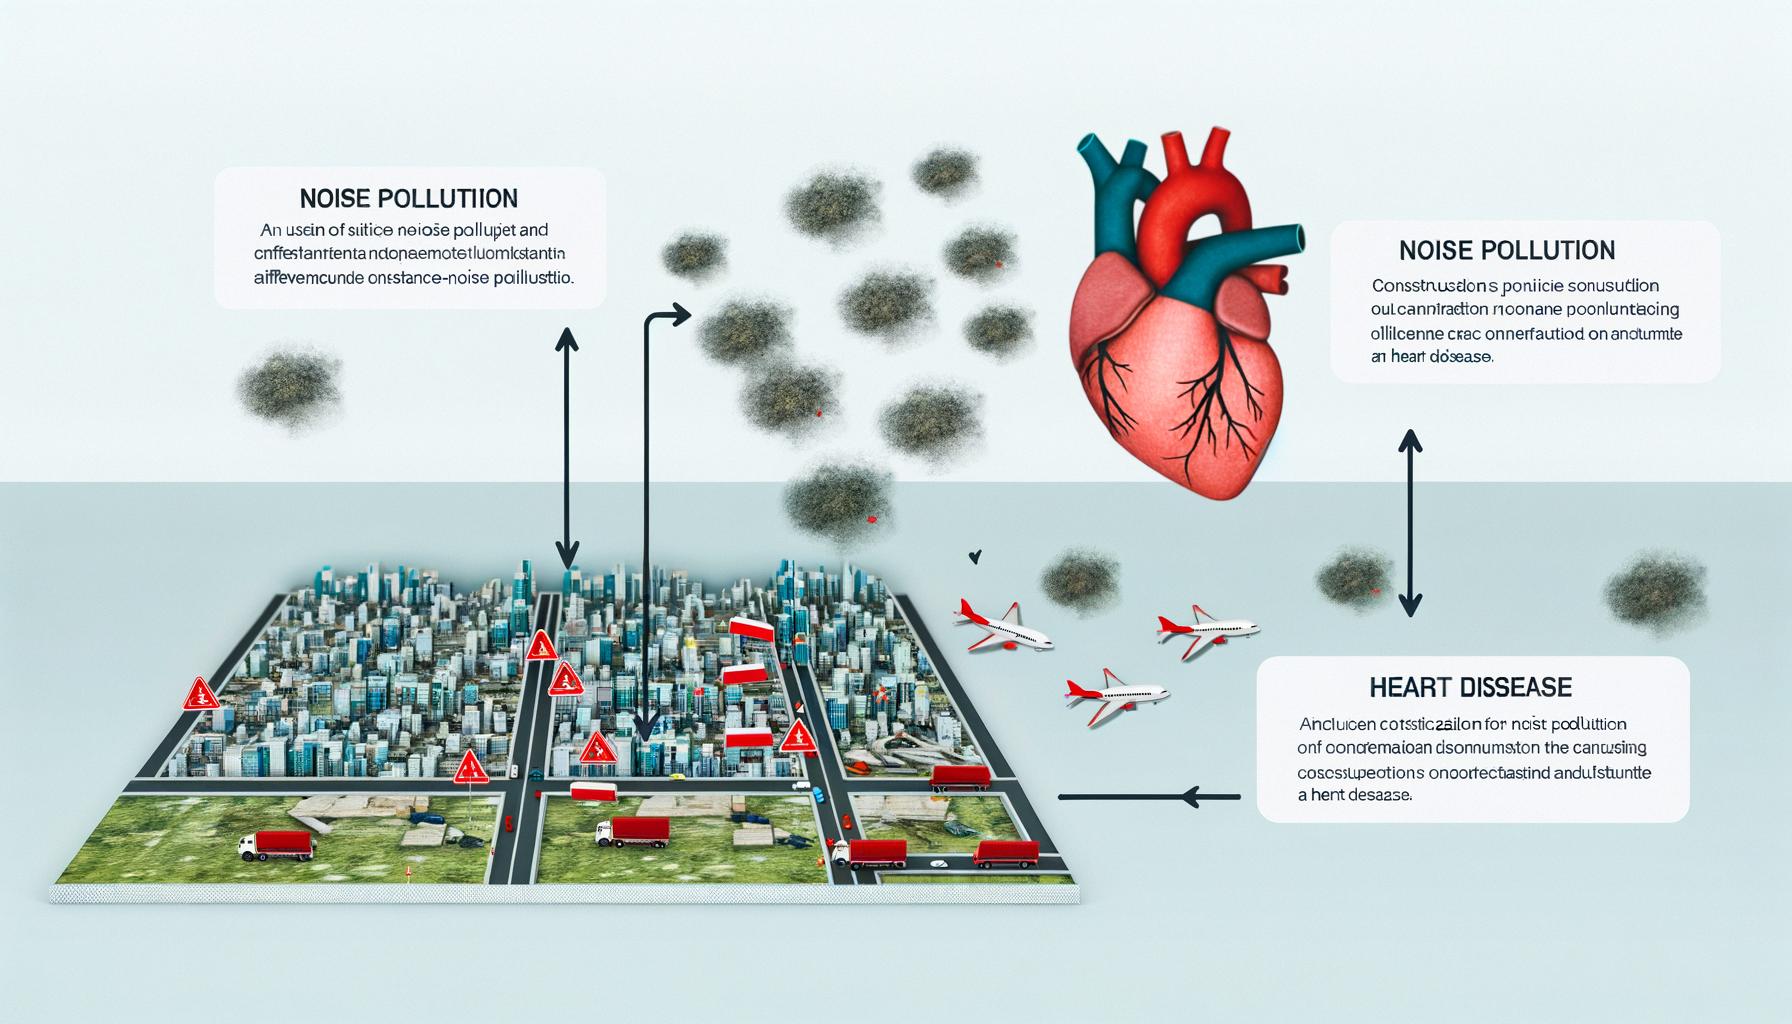 Noise pollution significantly increases cardiovascular risk, including heart disease and stroke.